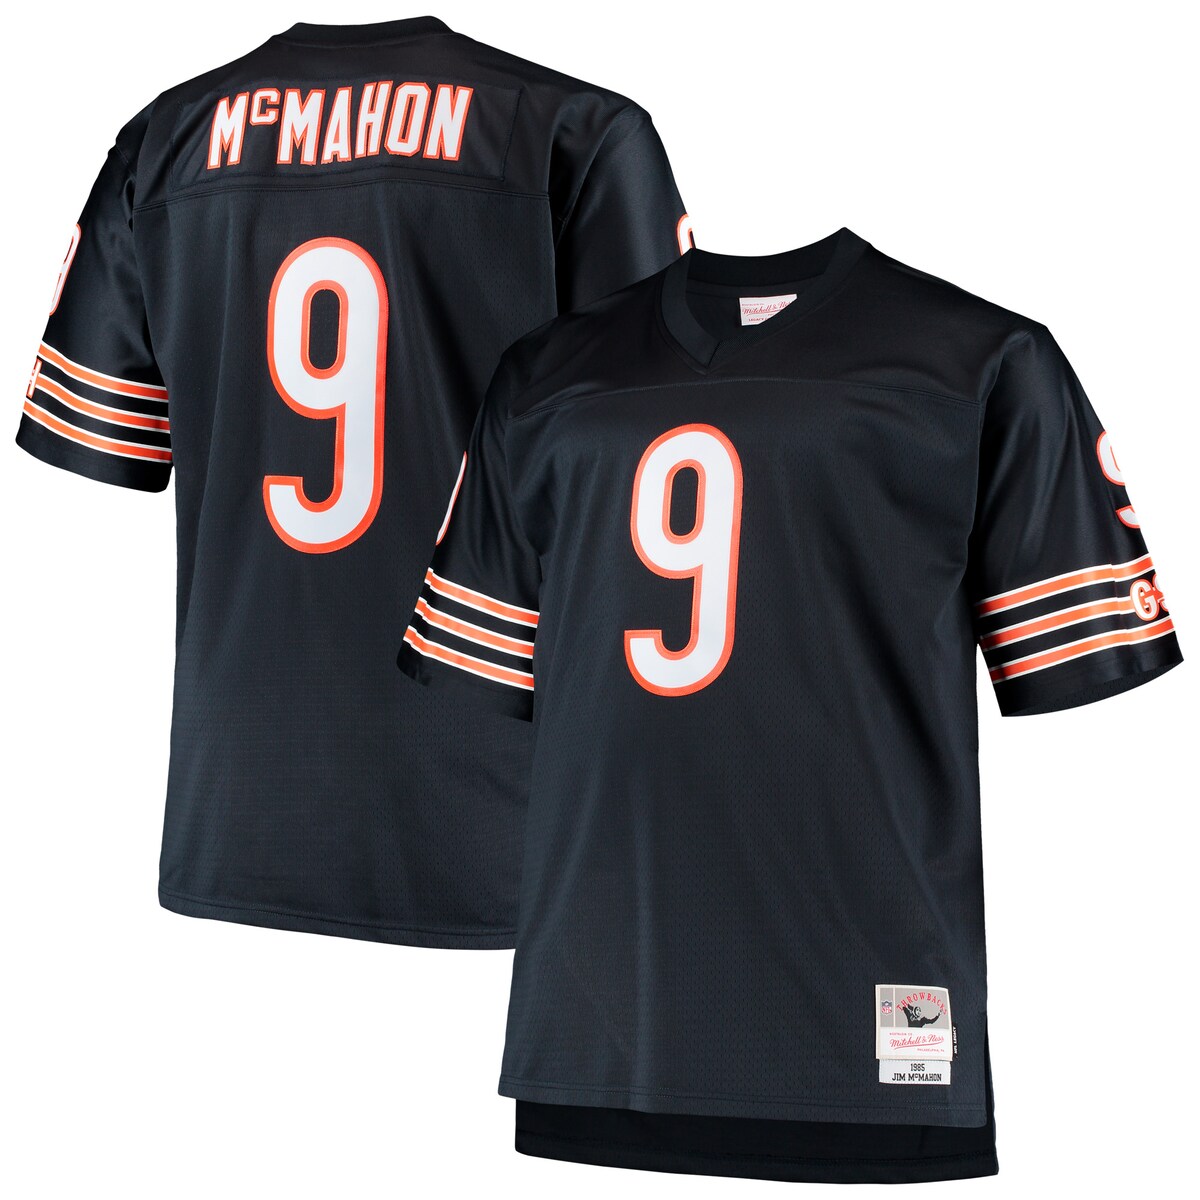 Showcase who your all-time favorite Chicago Bears player is by sporting this Jim McMahon 1990 Retired Player Replica jersey from Mitchell & Ness. It features authentic Chicago Bears graphics that will leave a lasting impression on fellow fans. You'll remind everyone around you of the legendary Jim McMahon.Replica JerseyMaterial: 100% PolyesterMachine wash, tumble dry lowStitched jock tag at bottom left hemBrand: Mitchell & NessShort sleeveV-neckMesh fabricStitched fabric applique with player year and nameImportedStitched tackle twill letters and numbersDroptail hem with side splitsOfficially licensedBack neck taping - no irritating stitch on the back neck